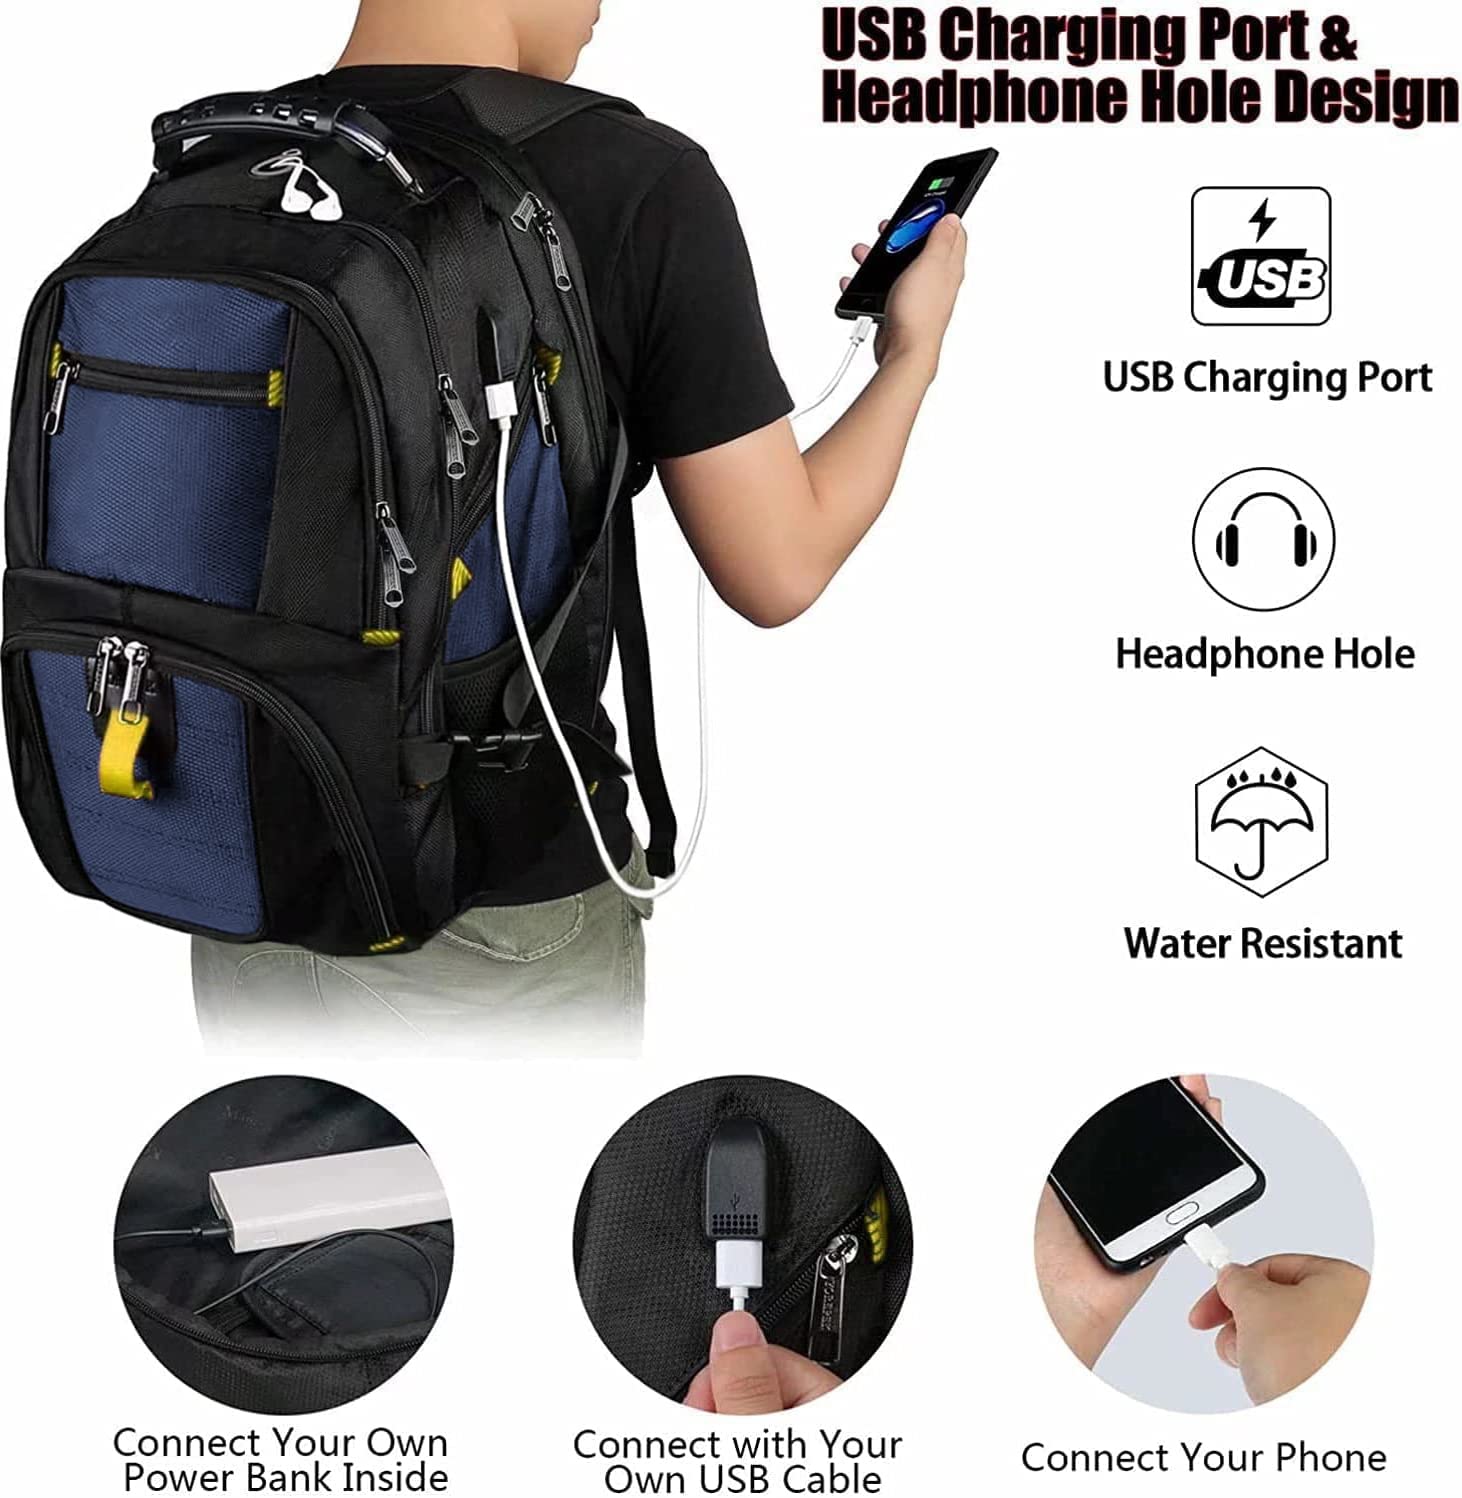 YOREPEK 17 inch Black Backpack & 18.4 inch Roy Blue Backpack, Water Resistant Airline Approved Business Bag with USB Charging Port